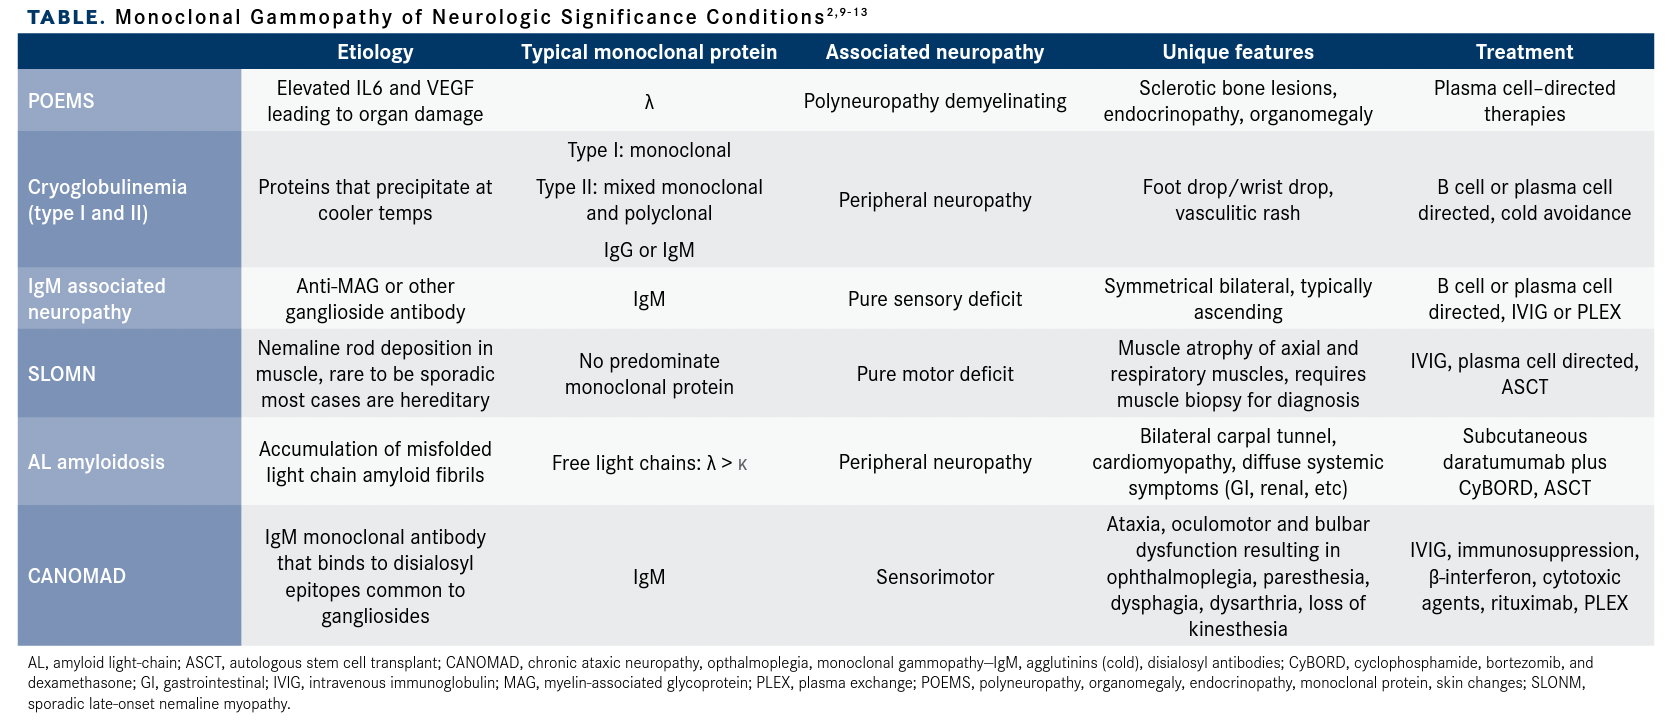 TABLE. Monoclonal Gammopathy of Neurologic Significance Conditions